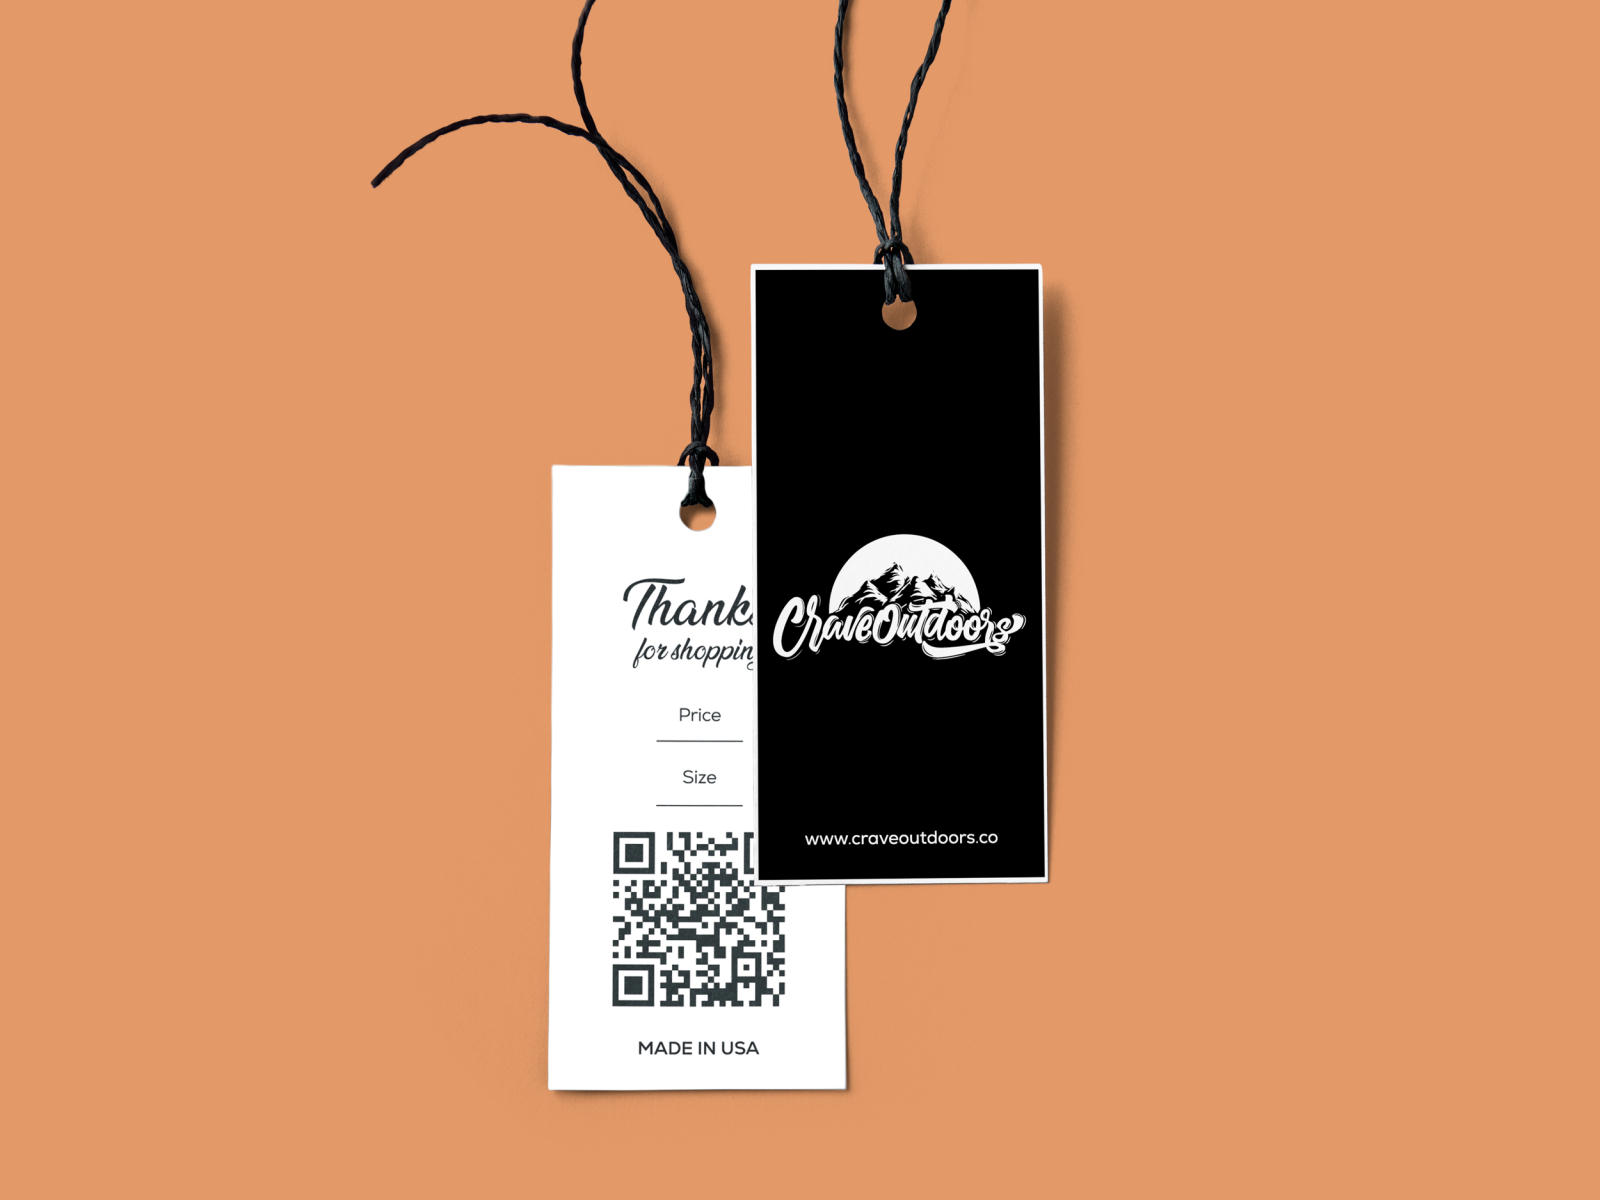 Design Core on X: Are you Looking for Customize Hang-Tag, neck